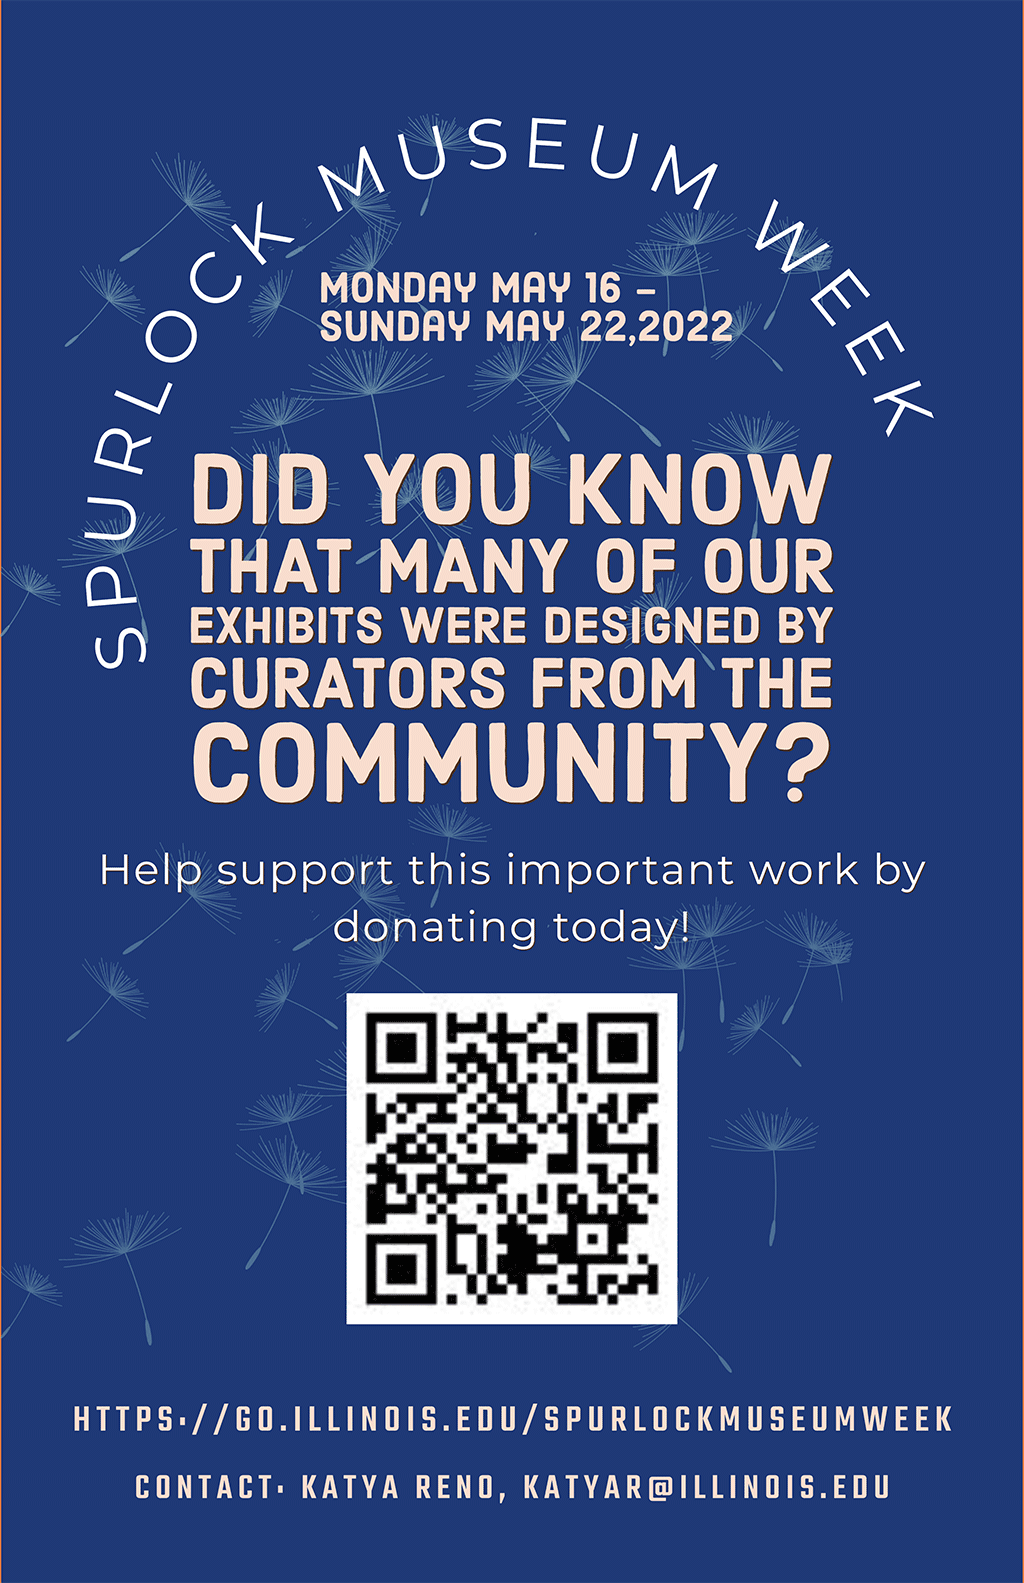 spurlock museum week poster highlighting community curation in text with QR code to campaign page